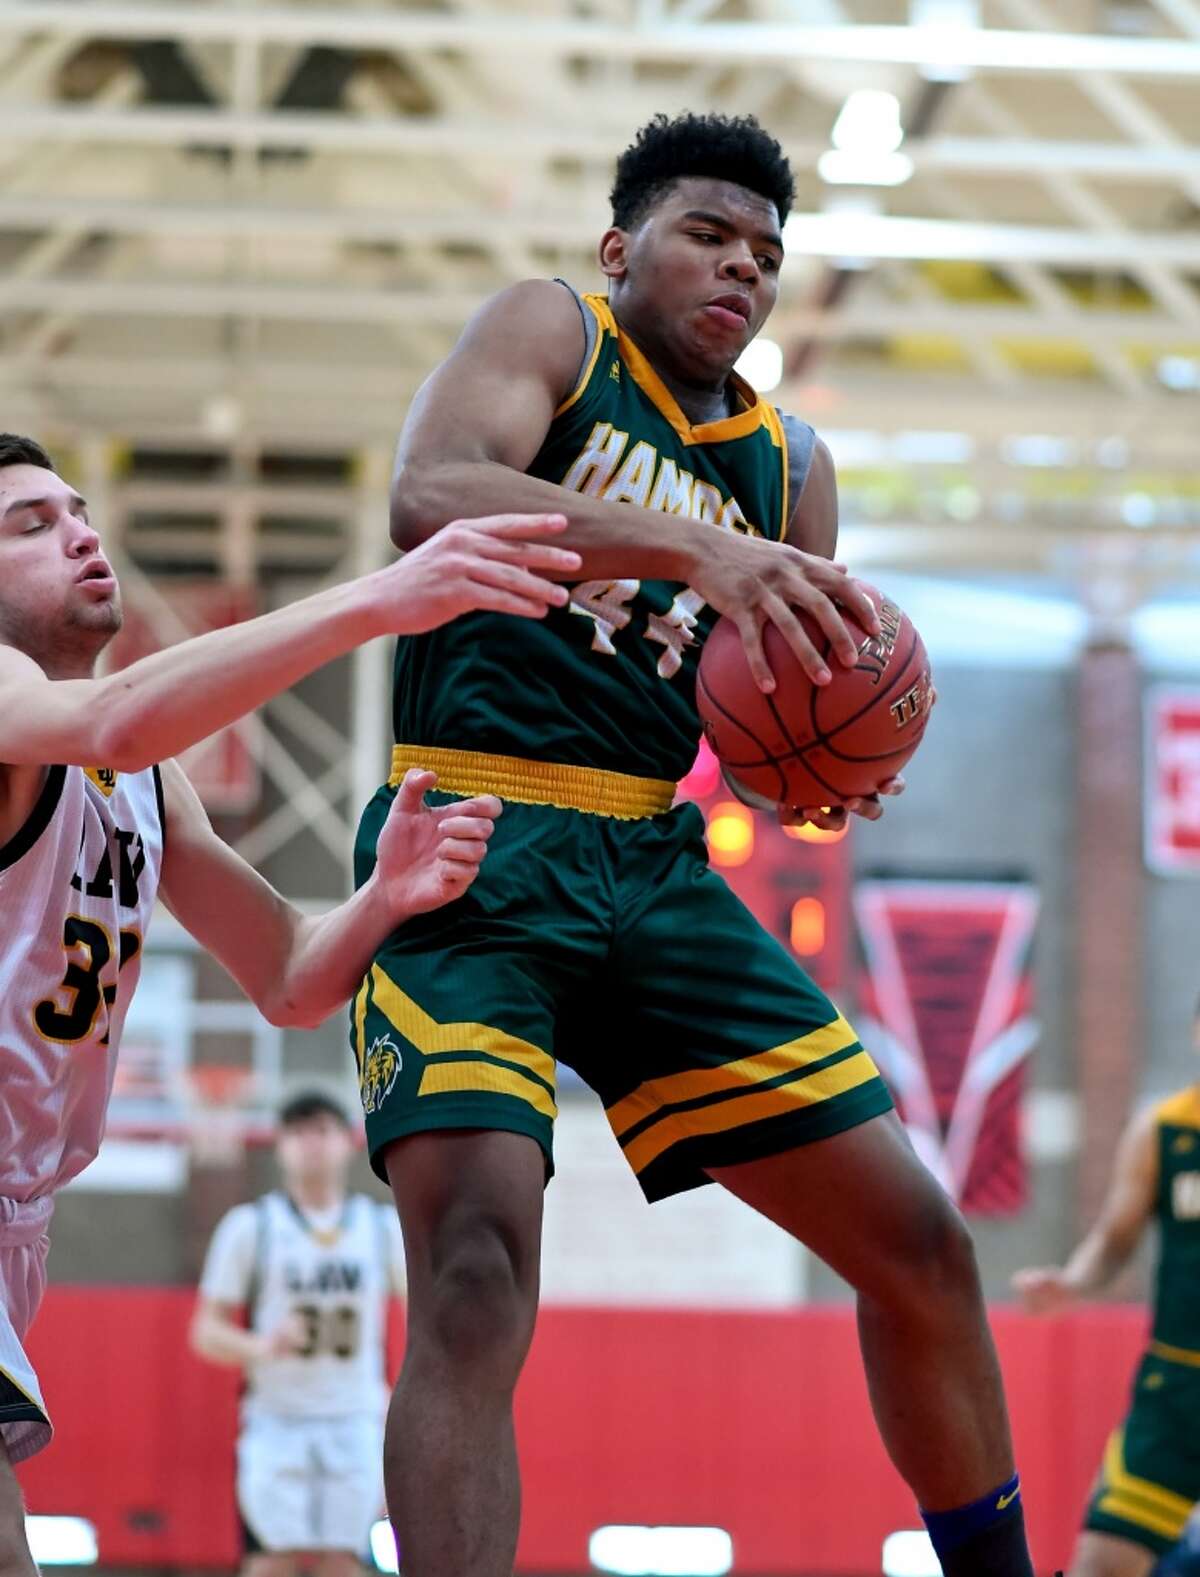 Justice Washington led Hamden’s comeback from a 20-point deficit.